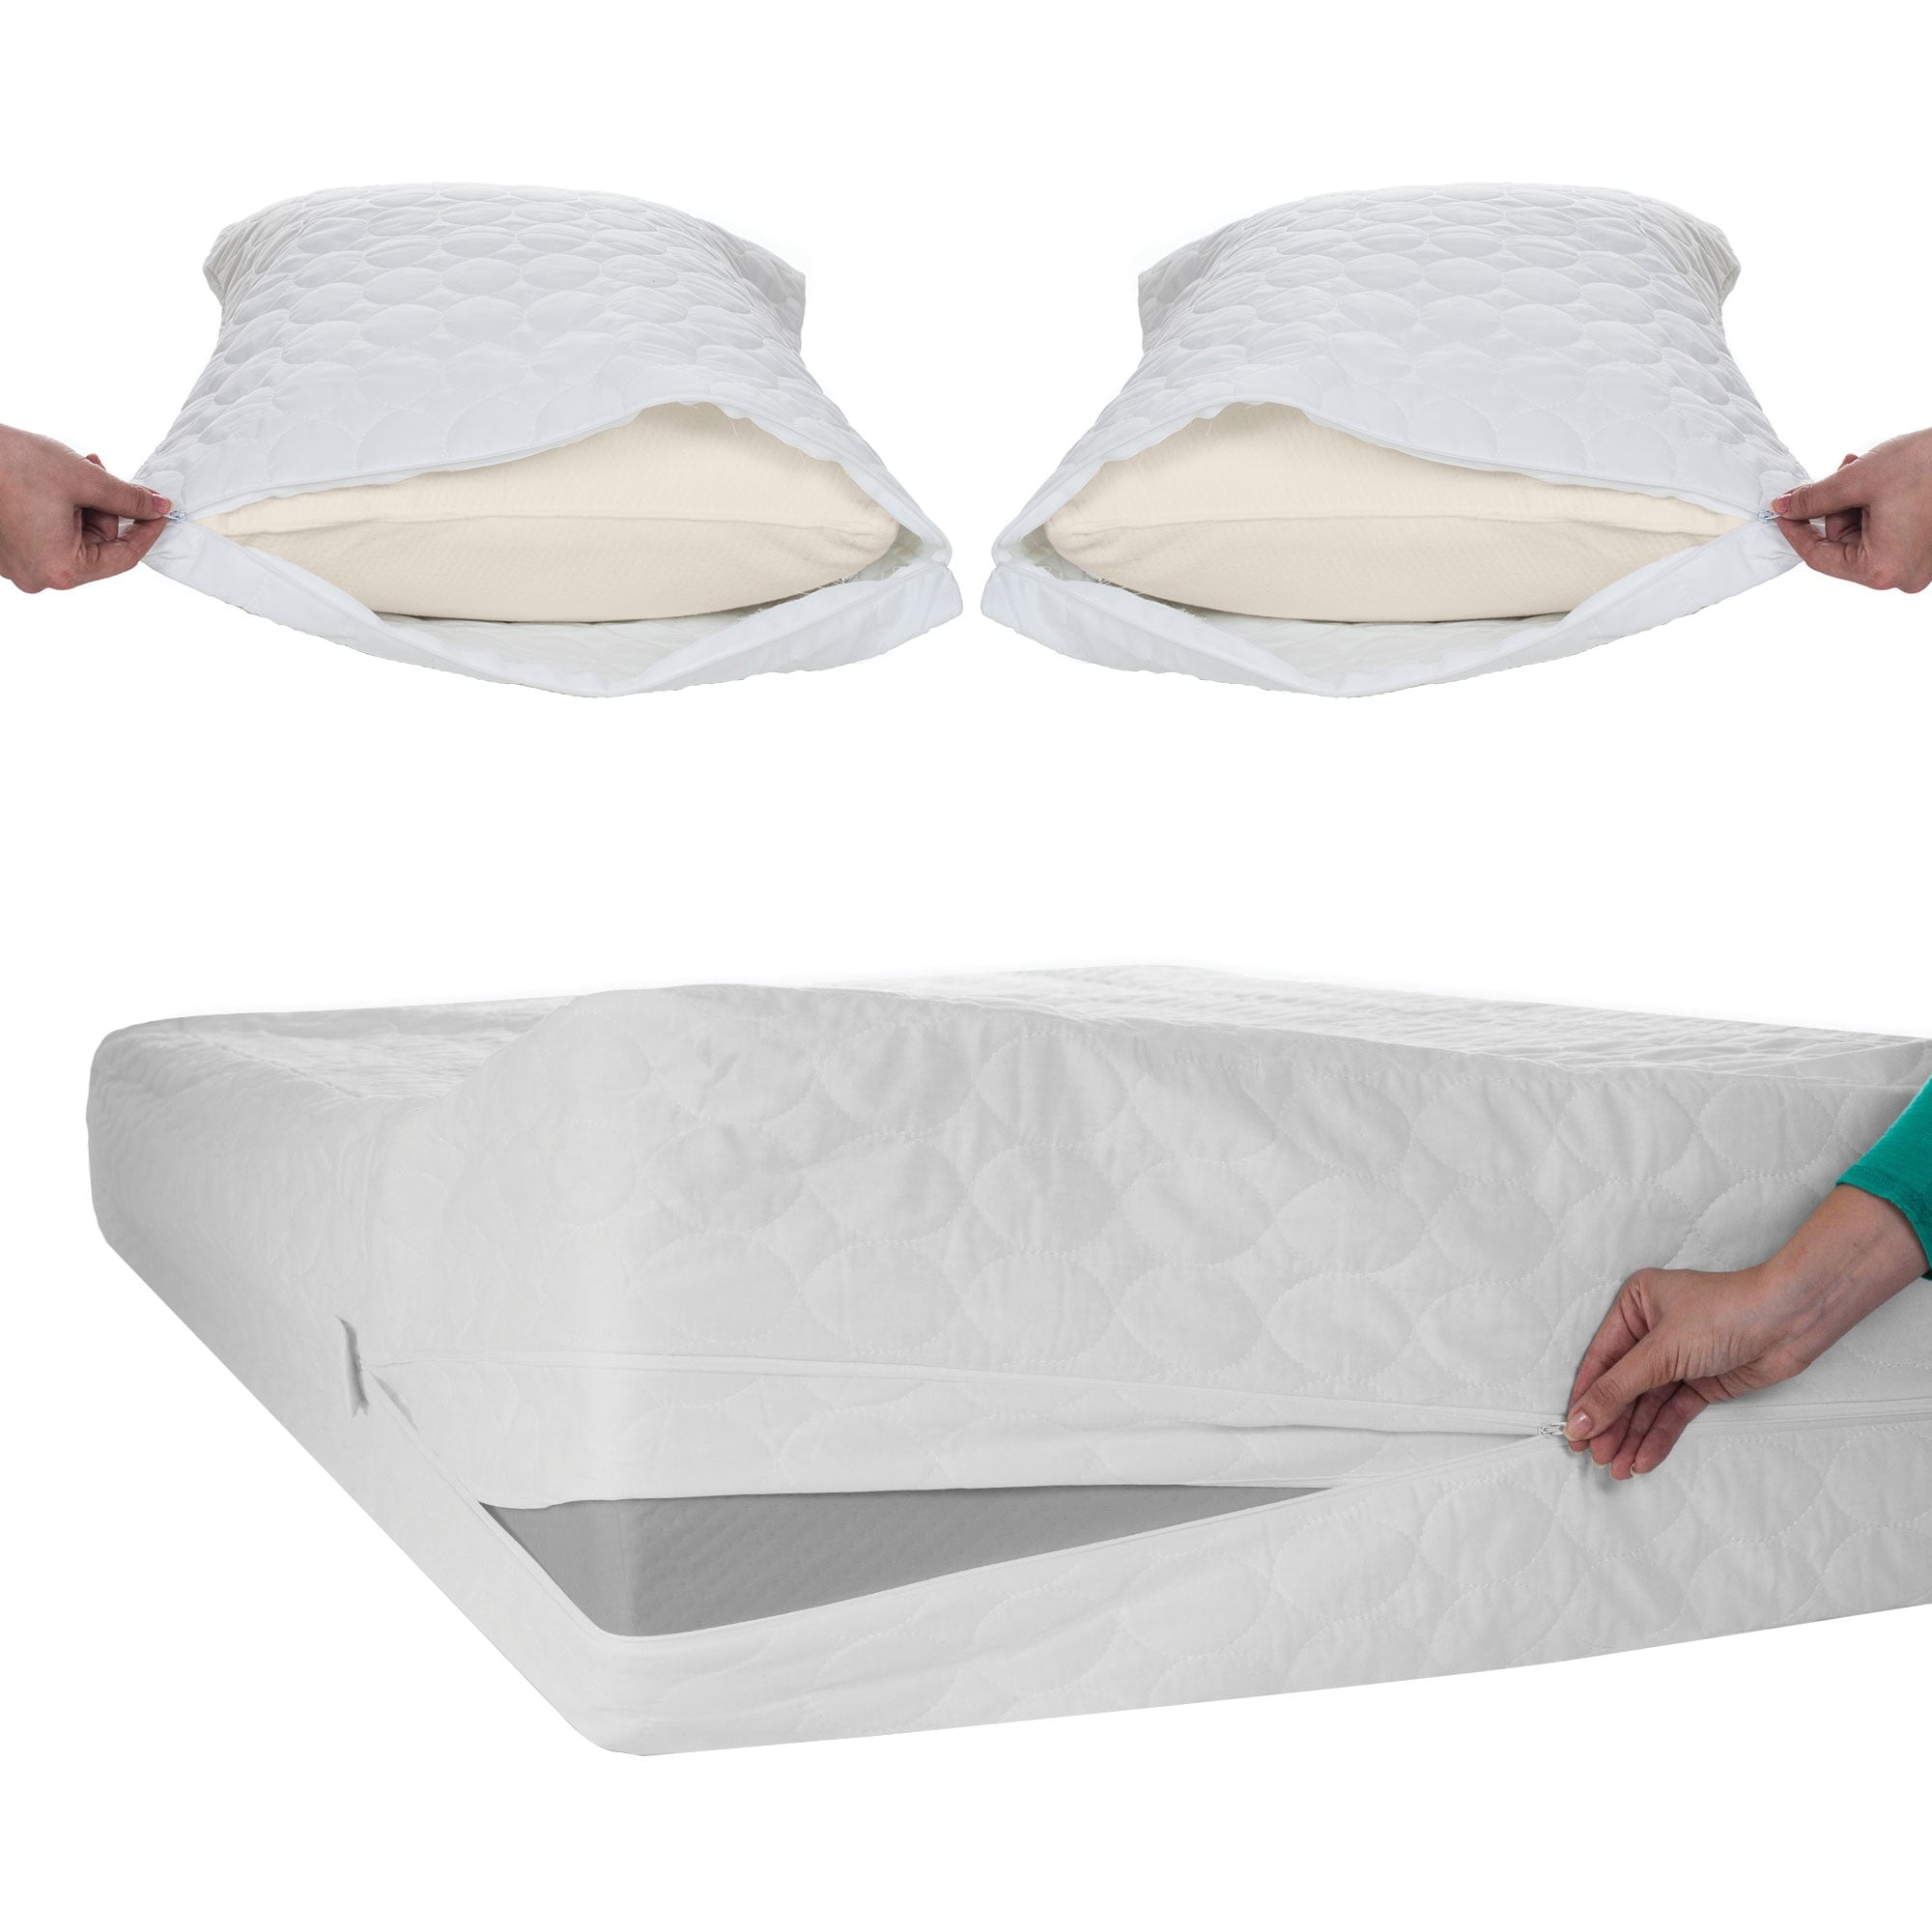 https://ak1.ostkcdn.com/images/products/is/images/direct/7ccf8dd29a58ec10ec1c93e540d0b911b8f08d8a/Remedy-Bed-Bug-Dust-Mite-Cotton-Mattress-%26-Pillow-Protector-Queen.jpg